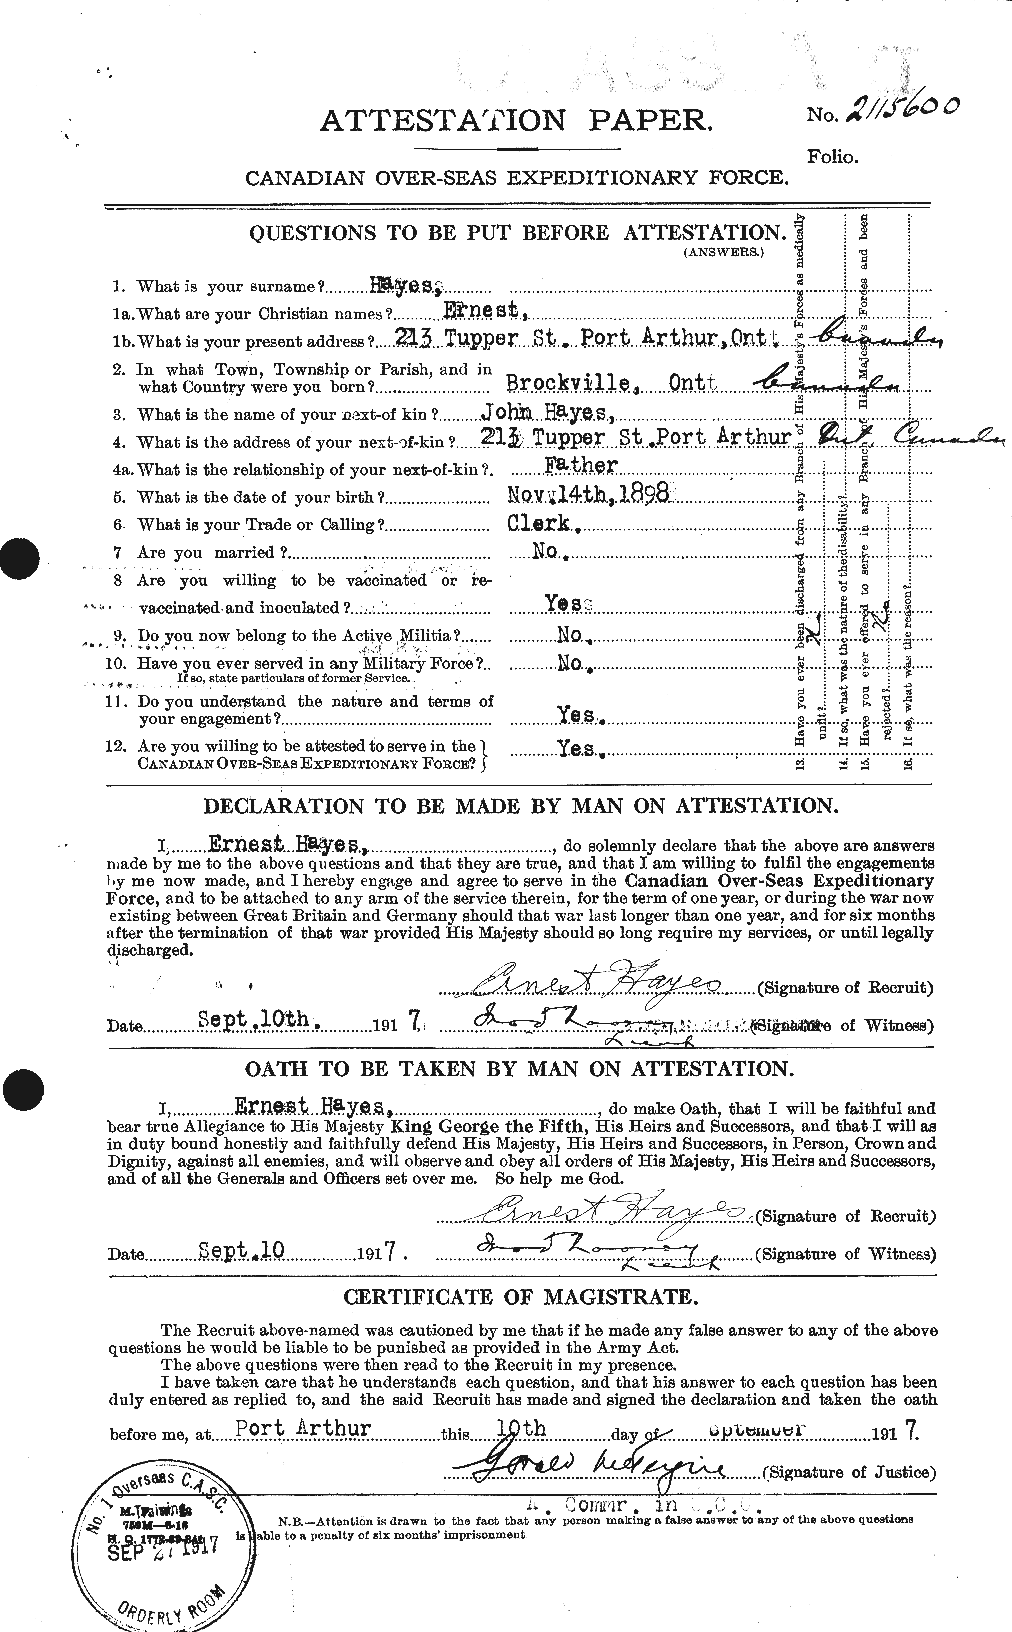 Personnel Records of the First World War - CEF 385444a